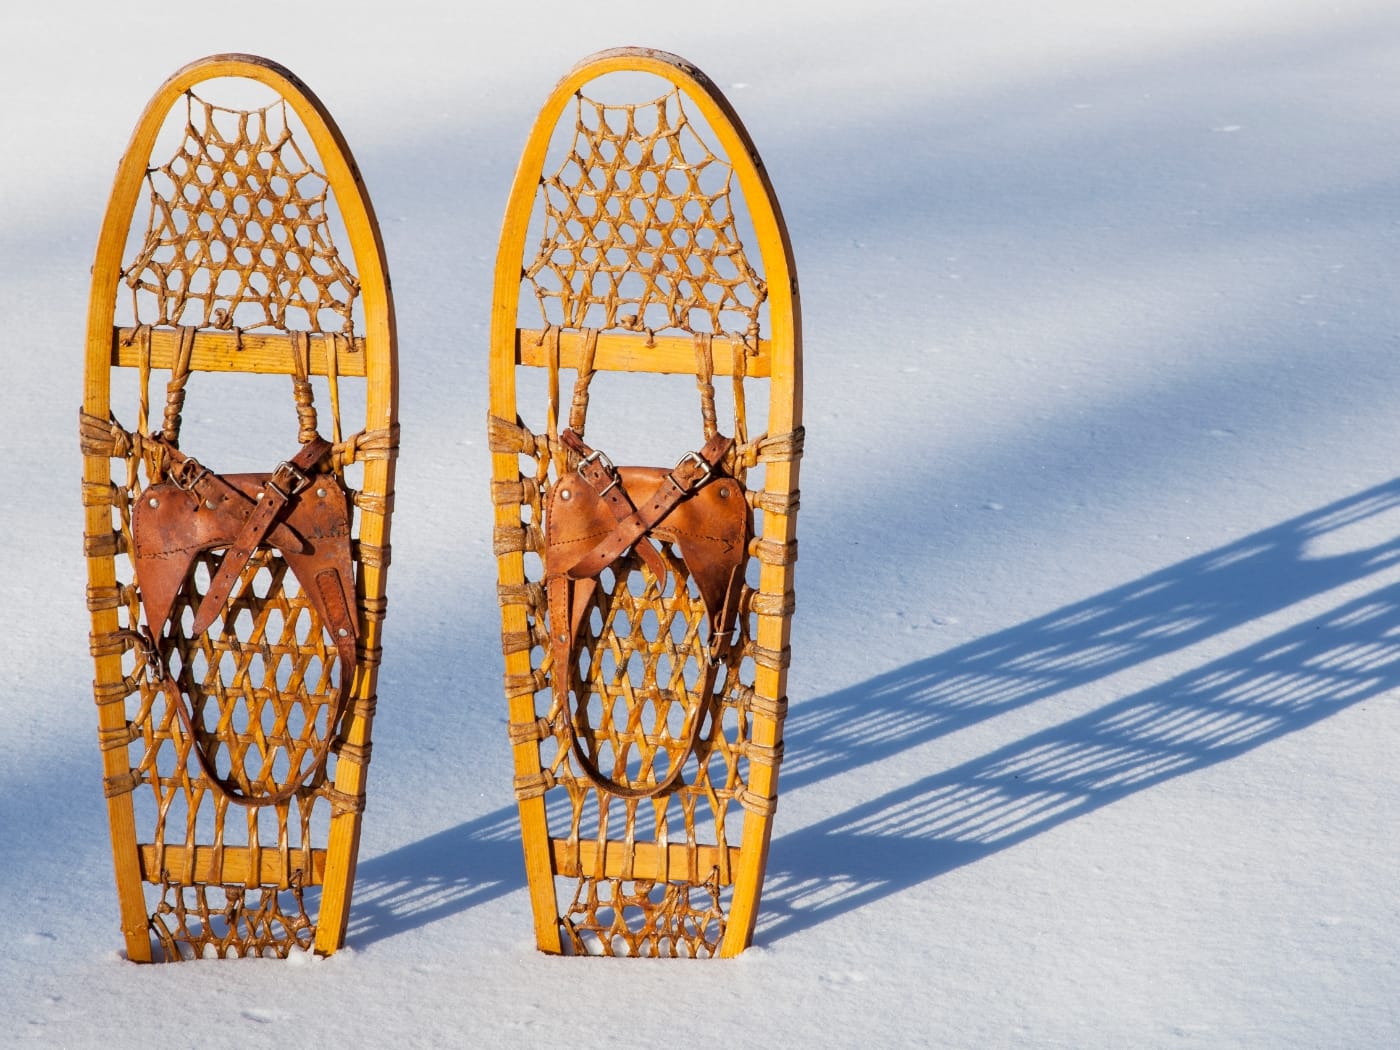 Traditional snowshoes in the snow at a ski resort near Innsbruck in Austria